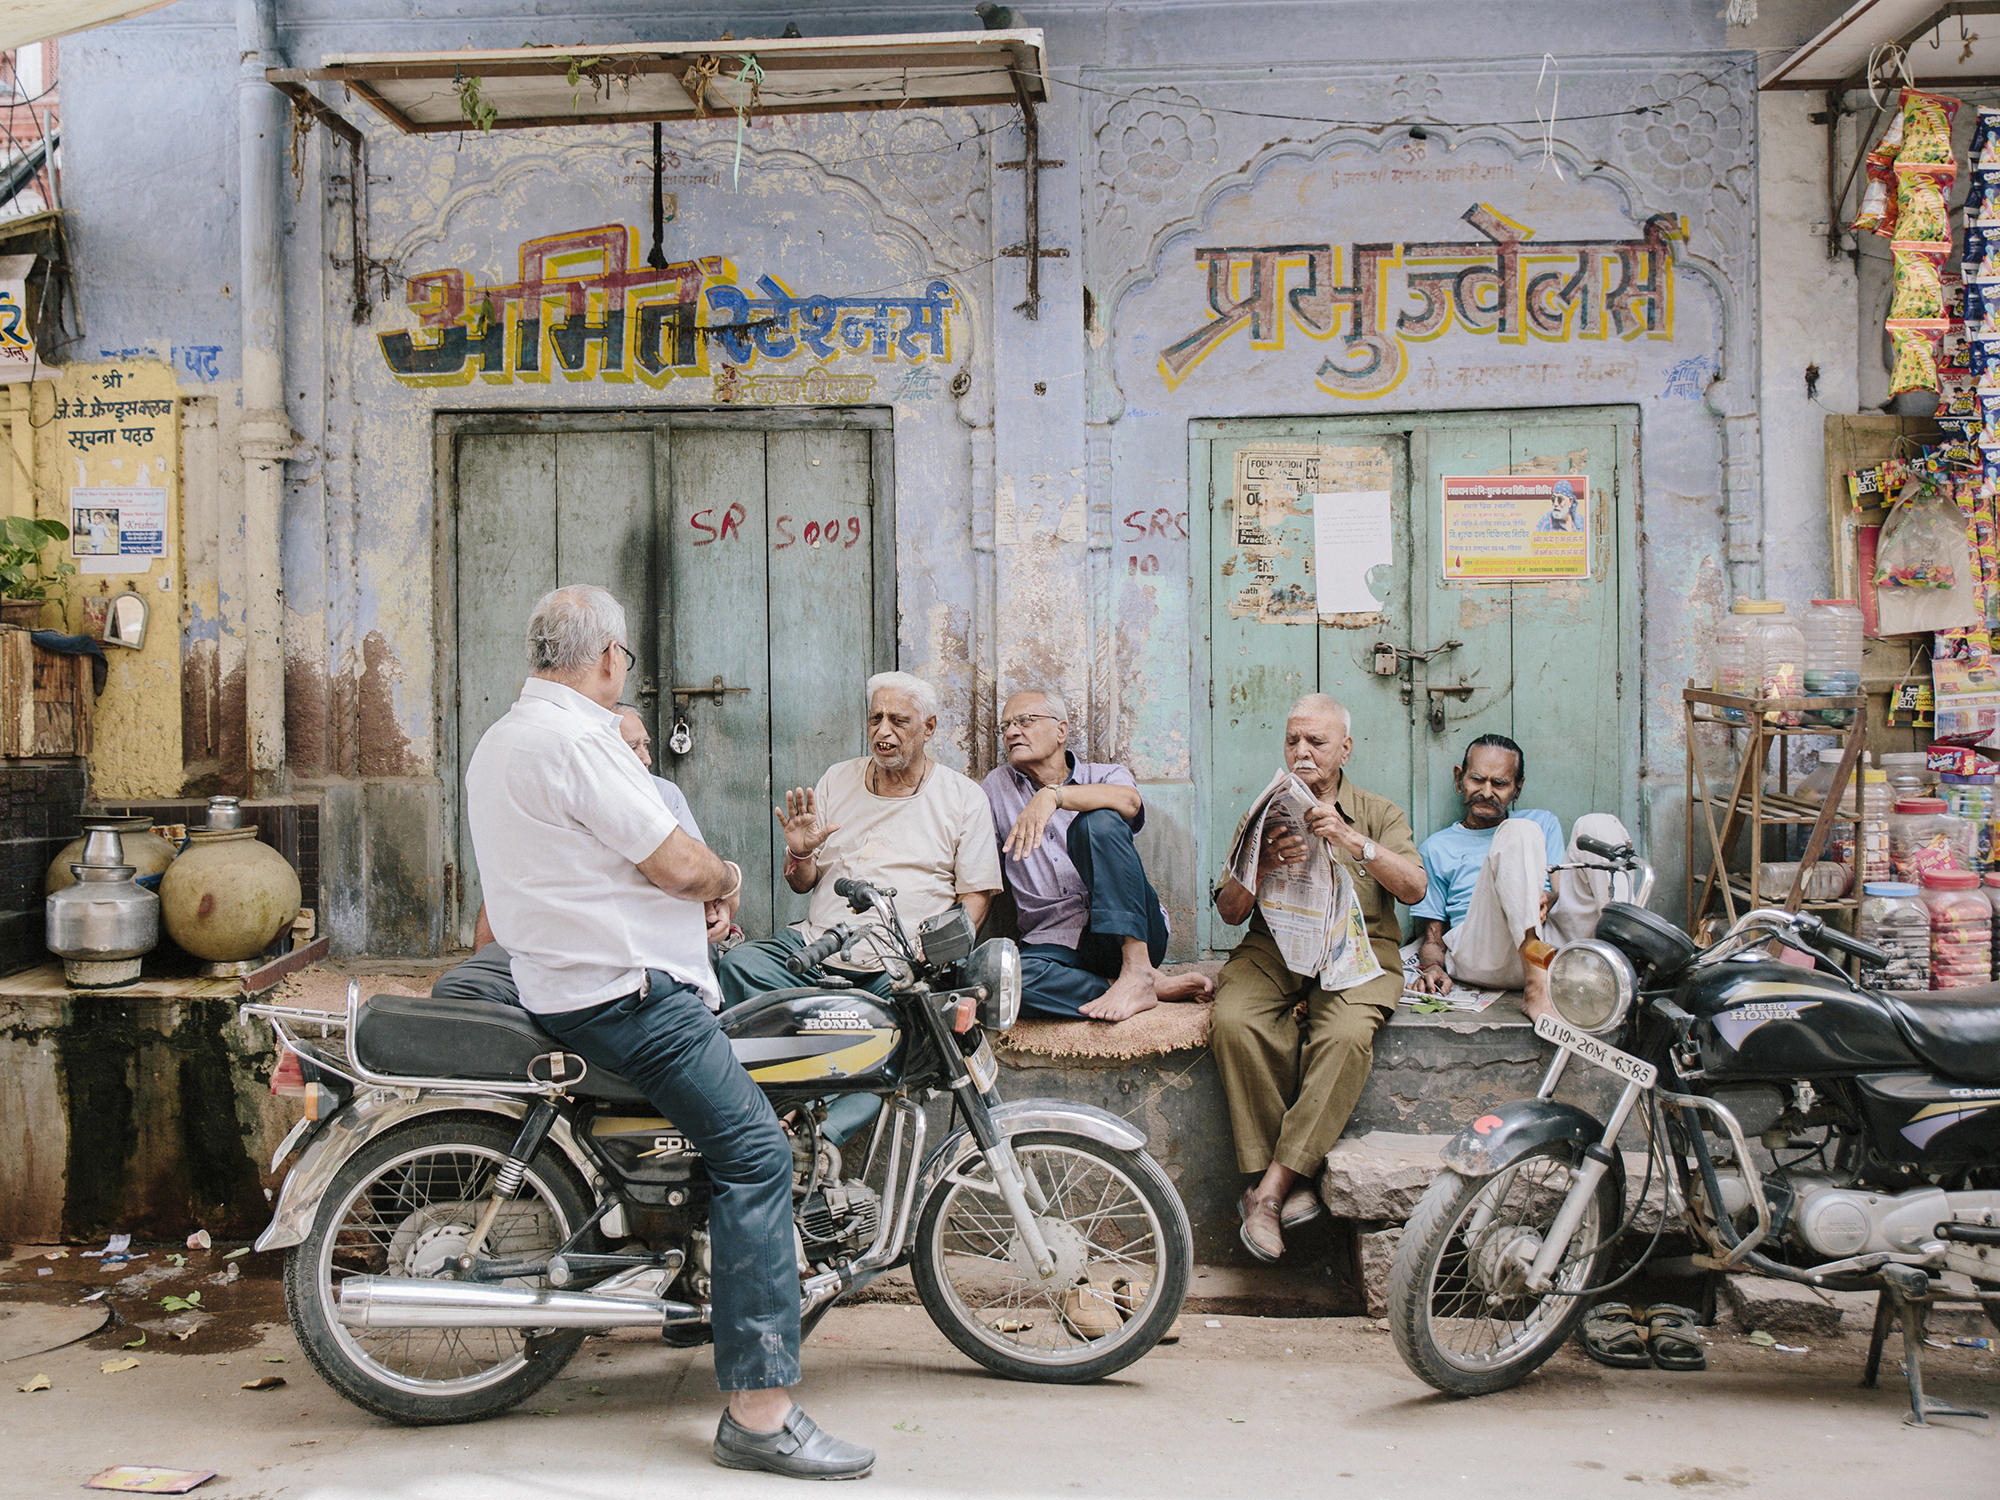 friends gathering in the streets of Jodhpur, India. 2017.